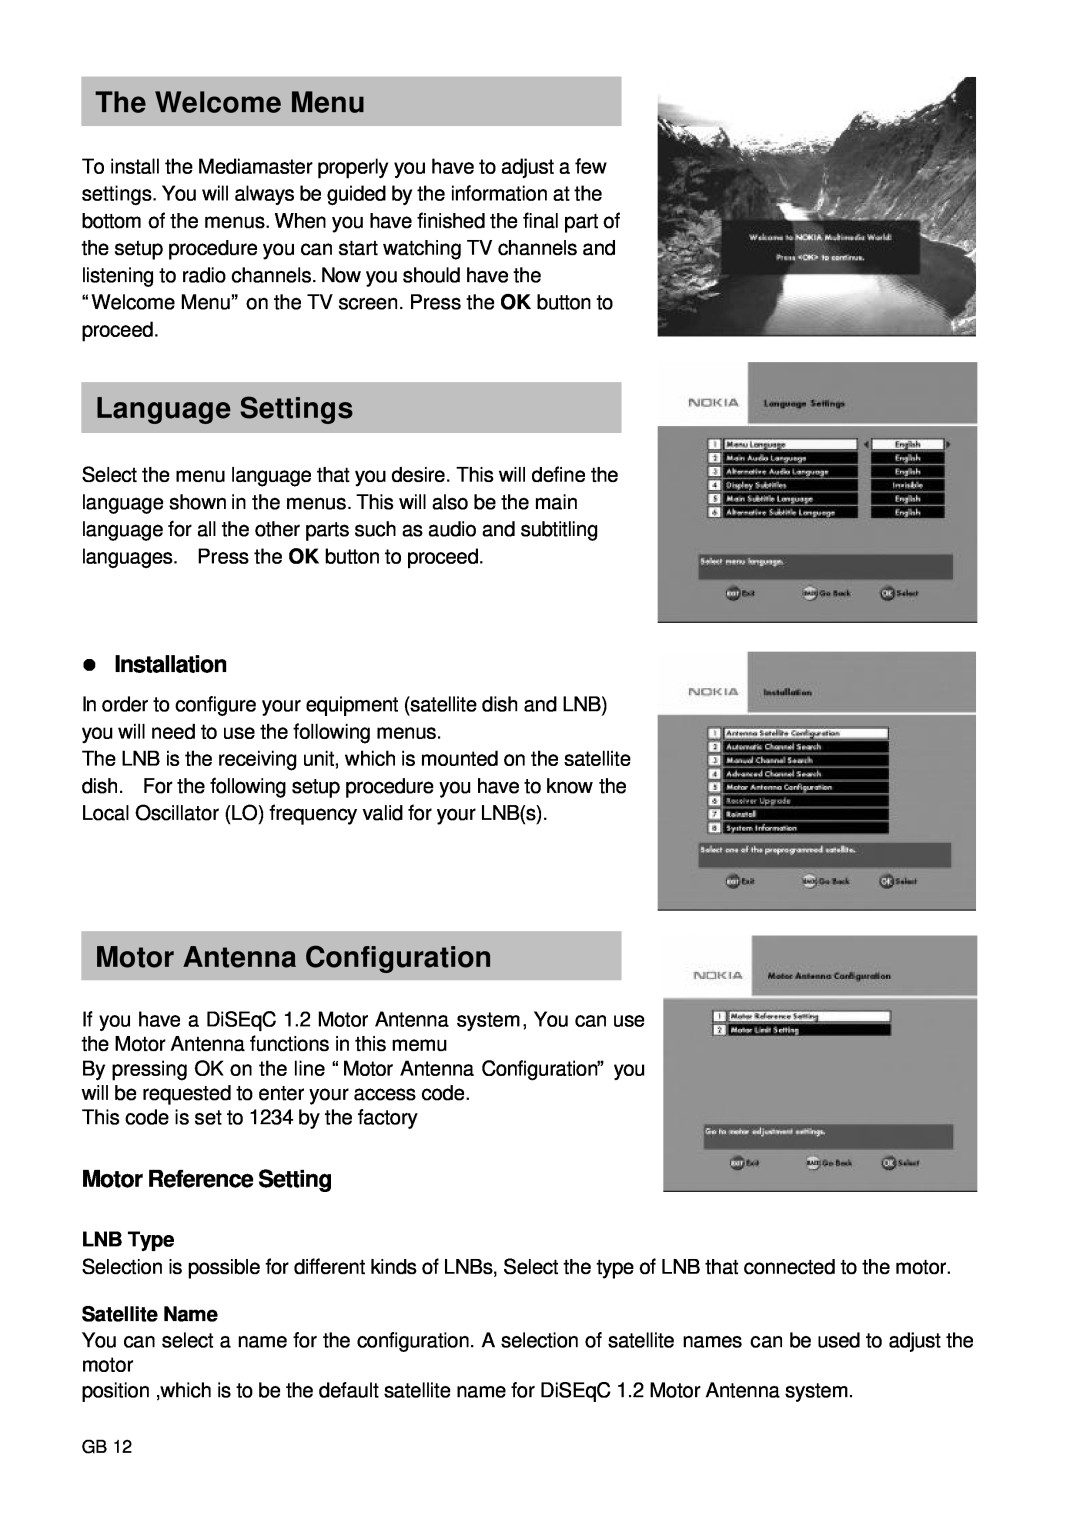 Nokia 9660S The Welcome Menu, Language Settings, Motor Antenna Configuration, Installation, Motor Reference Setting 